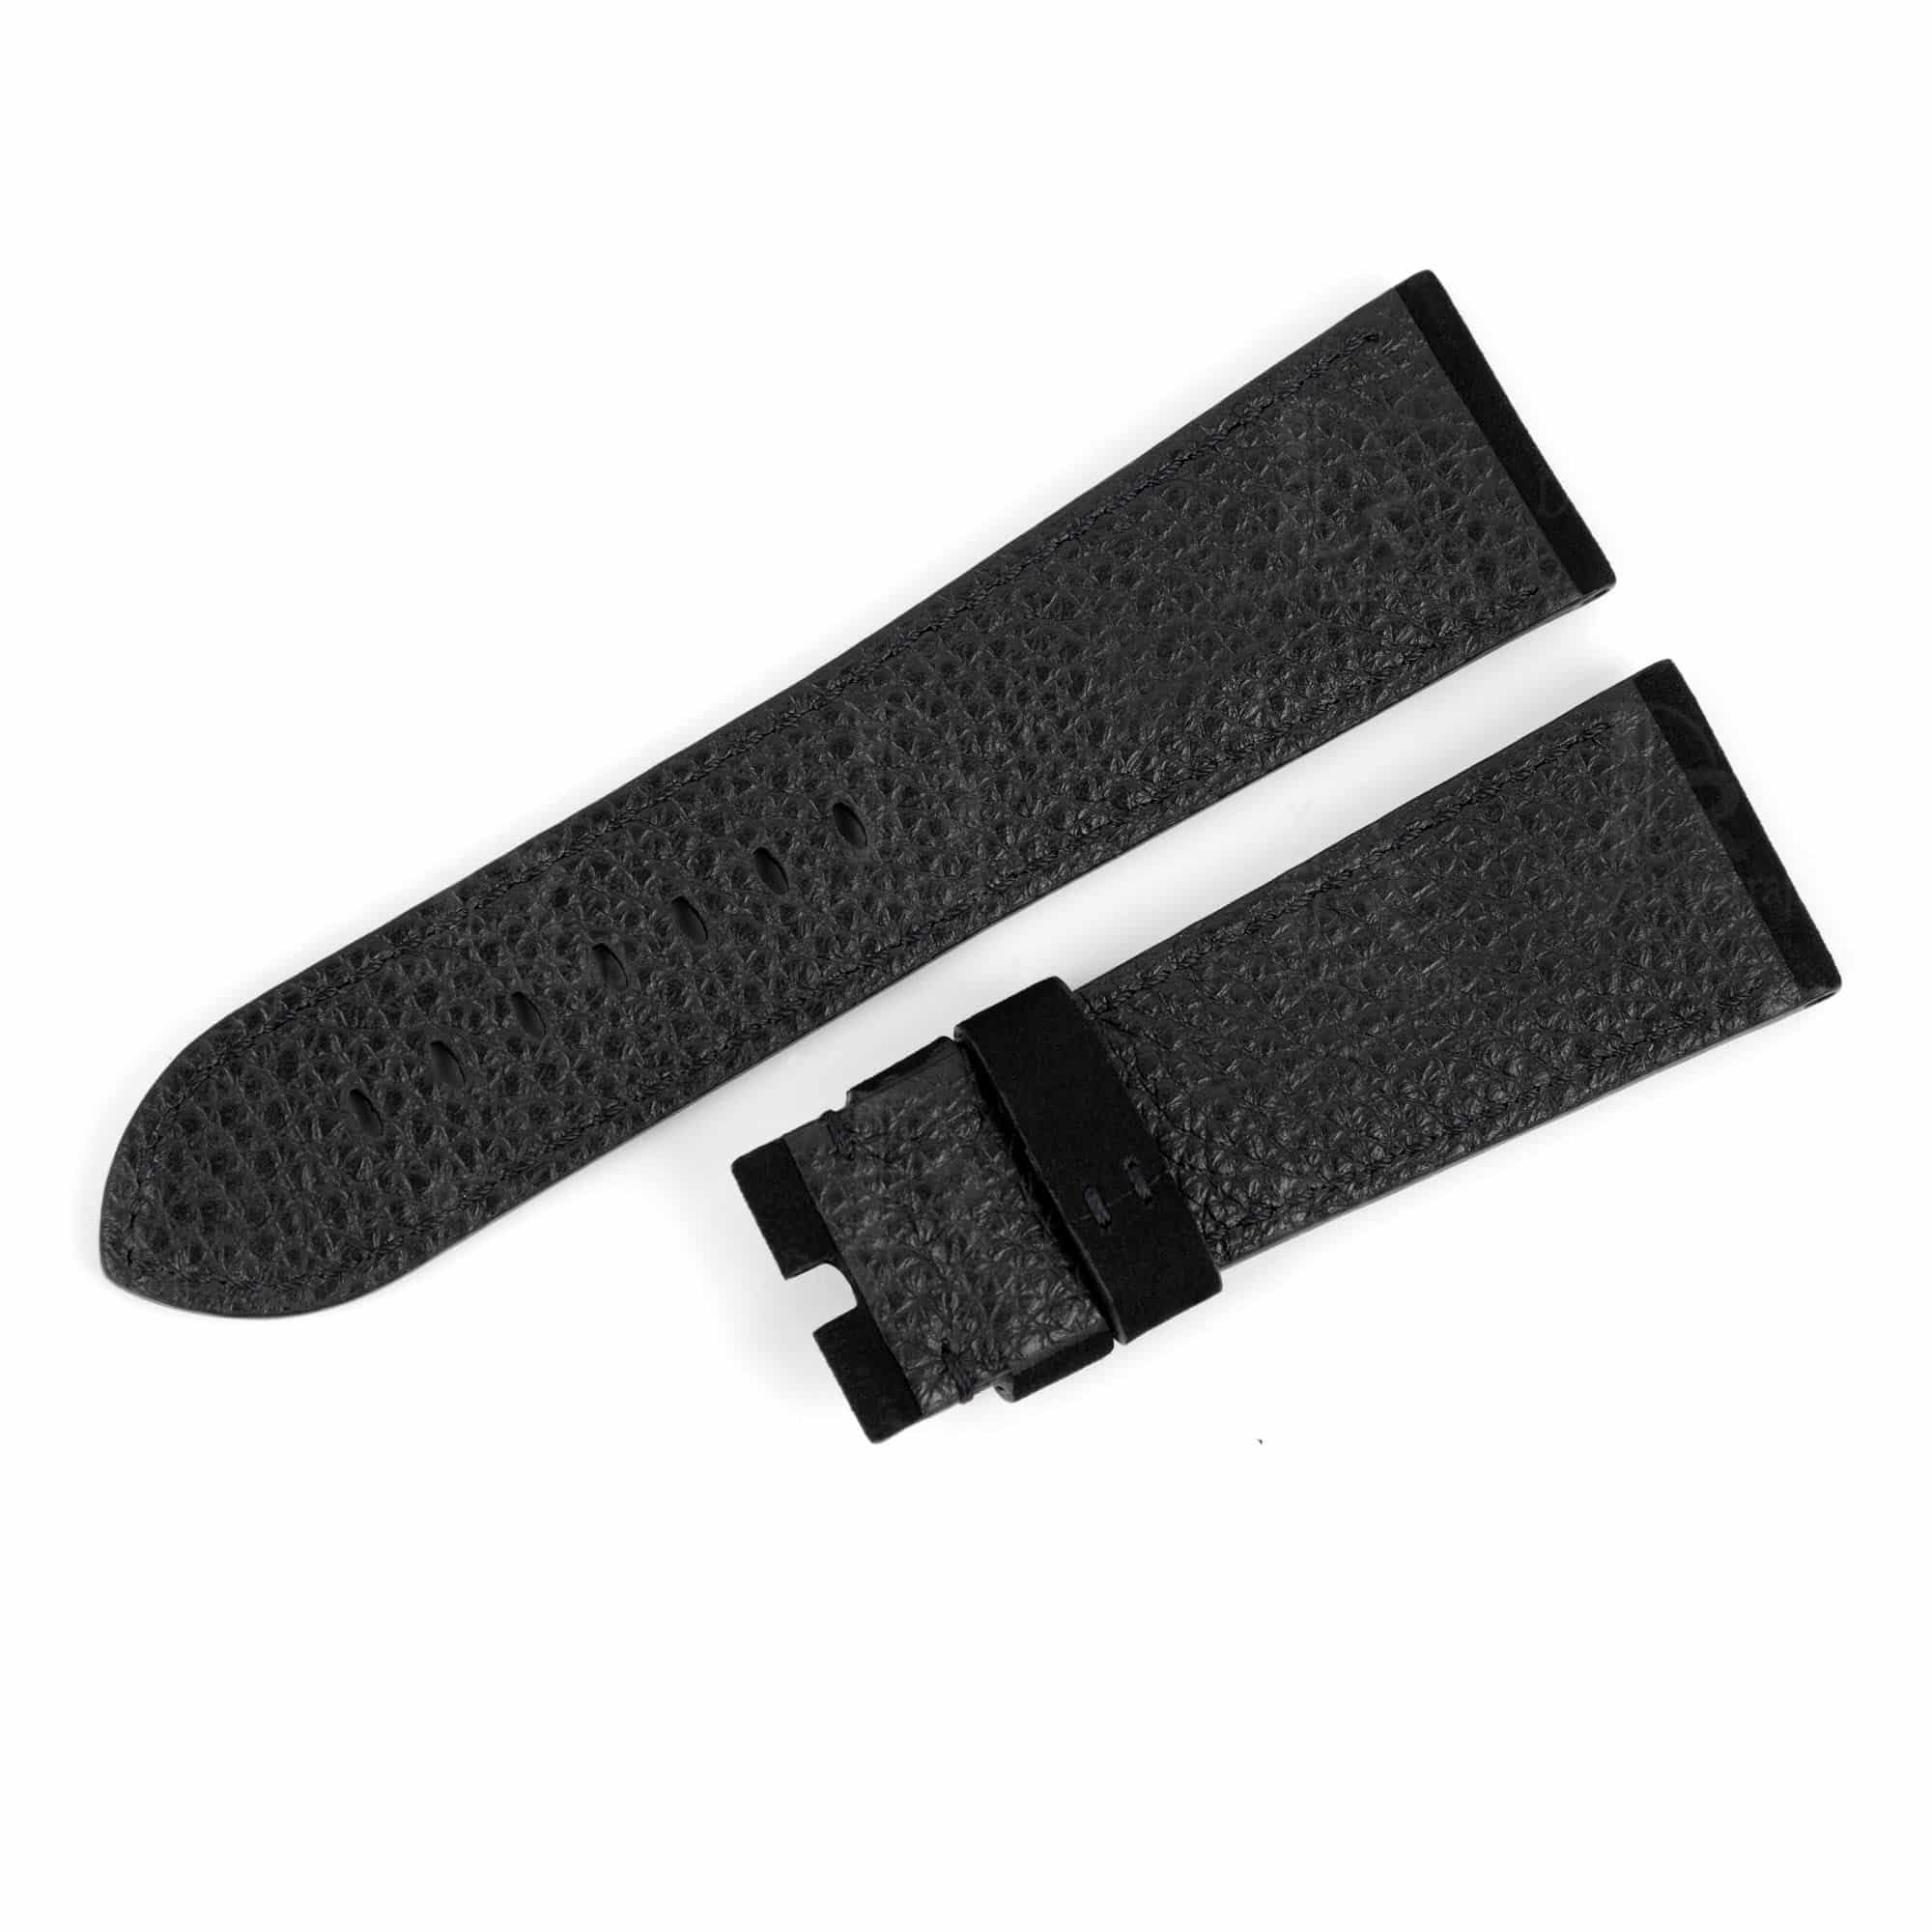 Custom OEM Premium calf material black leather Panerai strap 24mm 26mm 22mm & watch band replacement for Panerai Luminor Due Radiomir luxury watches for sale - Shop the best quality calfskin watch straps and watch bands from DR Watchstrap online at a low price